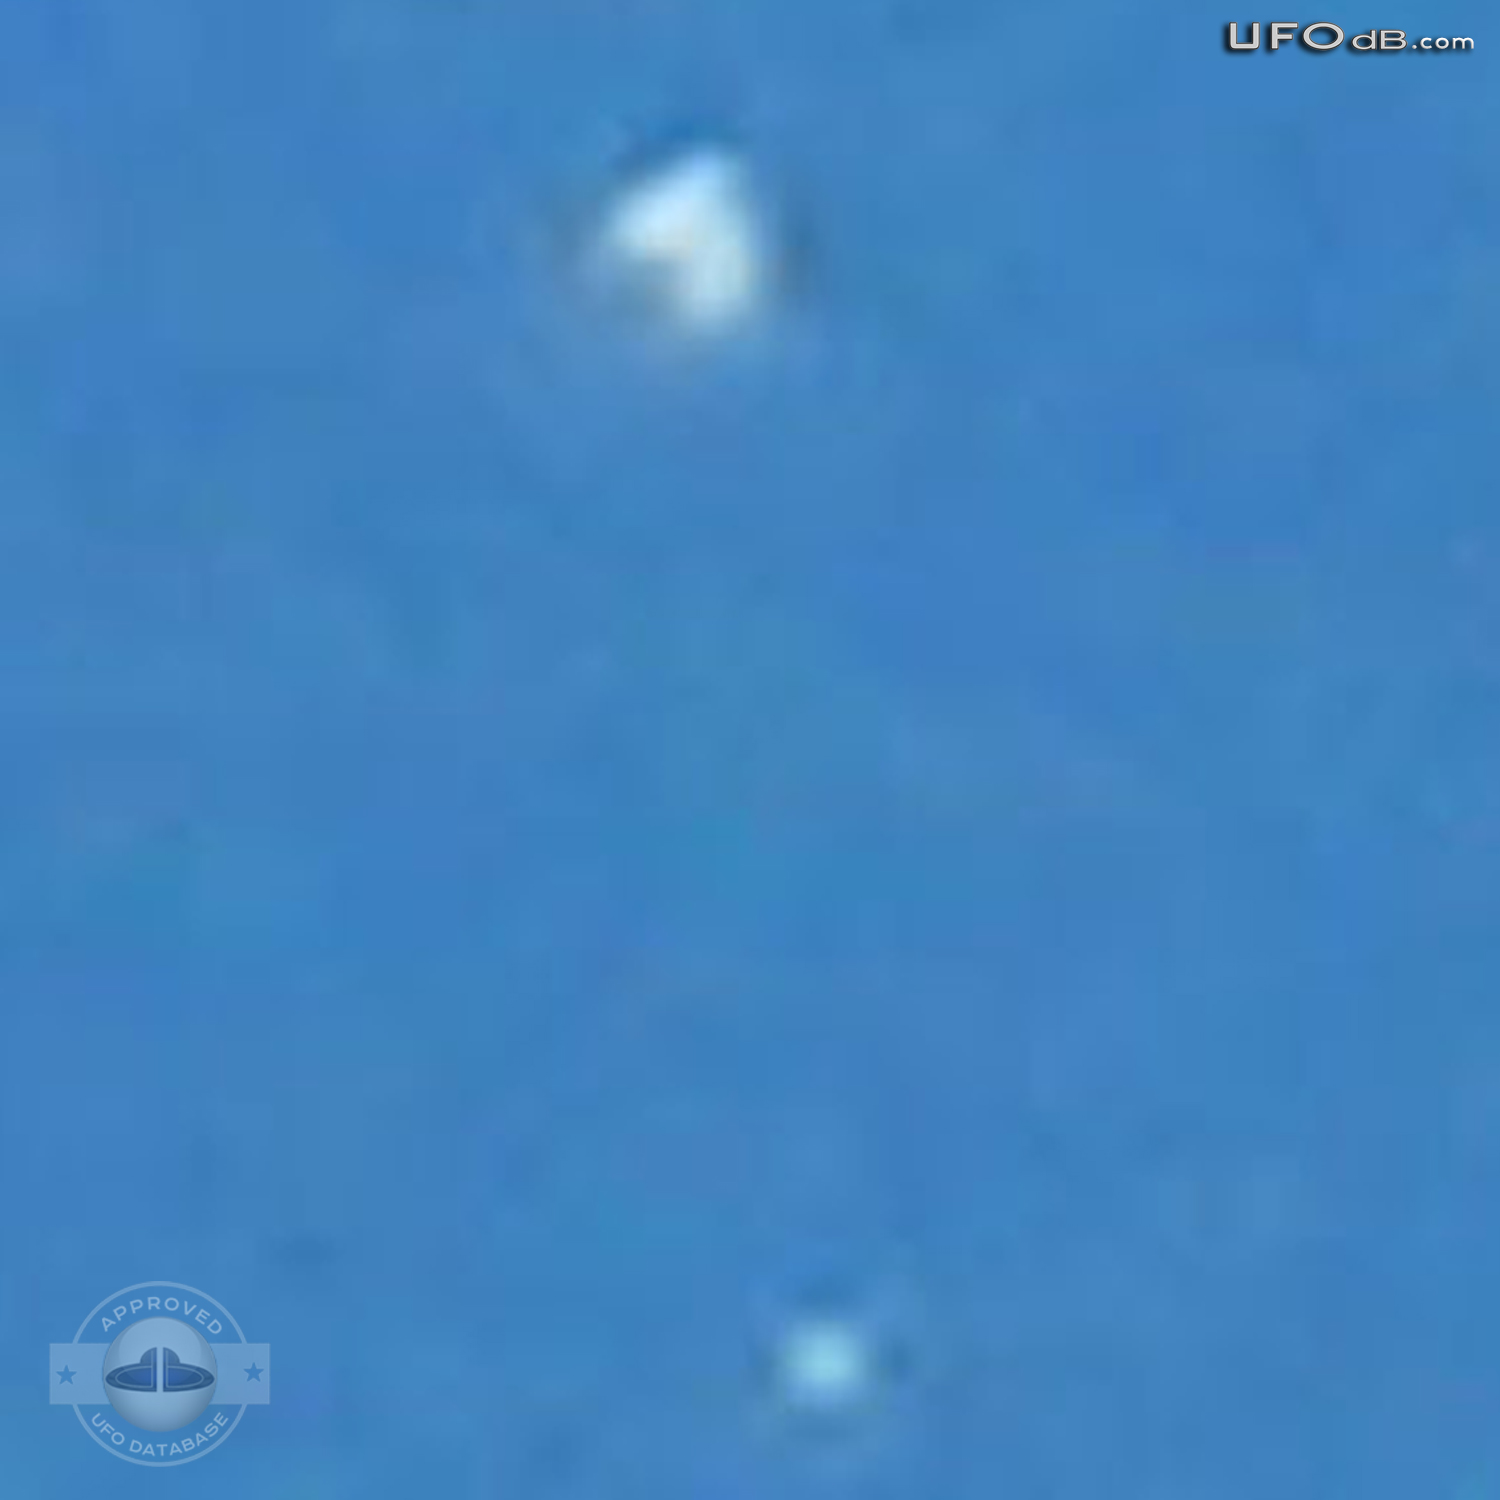 Five Apparent UFOs in the sky of Portland | Oregon, USA | May 1 2011 UFO Picture #314-4